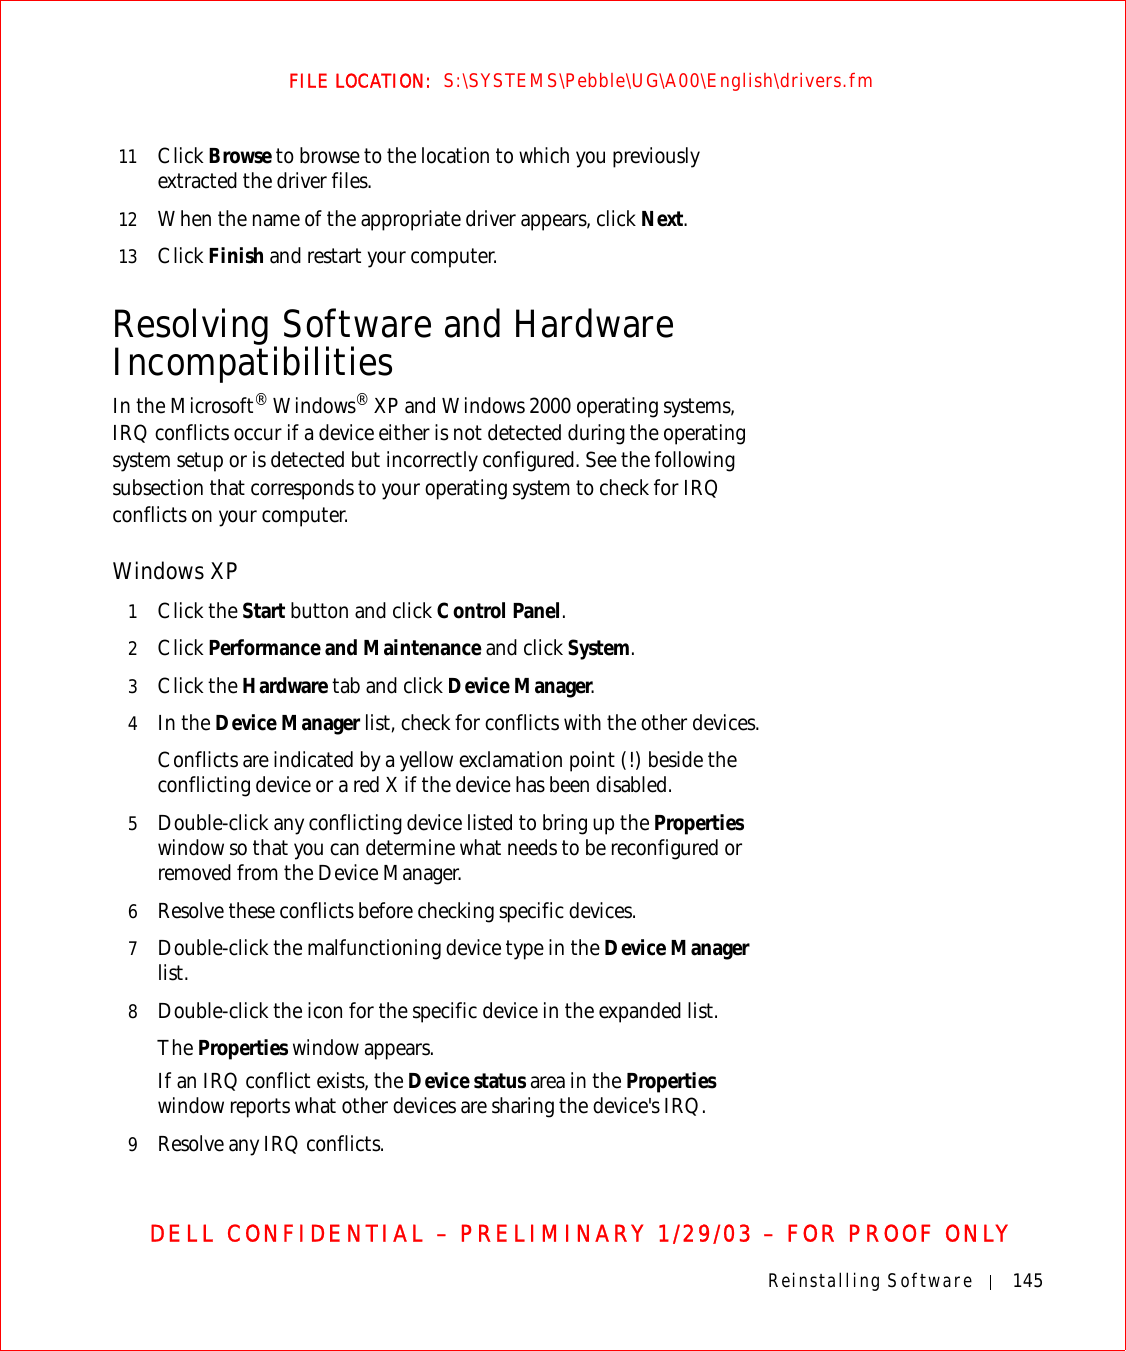 Reinstalling Software 145FILE LOCATION:  S:\SYSTEMS\Pebble\UG\A00\English\drivers.fmDELL CONFIDENTIAL – PRELIMINARY 1/29/03 – FOR PROOF ONLY11 Click Browse to browse to the location to which you previously extracted the driver files.12 When the name of the appropriate driver appears, click Next.13 Click Finish and restart your computer.Resolving Software and Hardware IncompatibilitiesIn the Microsoft® Windows® XP and Windows 2000 operating systems, IRQ conflicts occur if a device either is not detected during the operating system setup or is detected but incorrectly configured. See the following subsection that corresponds to your operating system to check for IRQ conflicts on your computer.Windows XP1Click the Start button and click Control Panel. 2Click Performance and Maintenance and click System. 3Click the Hardware tab and click Device Manager.4In the Device Manager list, check for conflicts with the other devices. Conflicts are indicated by a yellow exclamation point (!) beside the conflicting device or a red X if the device has been disabled.5Double-click any conflicting device listed to bring up the Properties window so that you can determine what needs to be reconfigured or removed from the Device Manager. 6Resolve these conflicts before checking specific devices.7Double-click the malfunctioning device type in the Device Manager list. 8Double-click the icon for the specific device in the expanded list.The Properties window appears. If an IRQ conflict exists, the Device status area in the Properties window reports what other devices are sharing the device&apos;s IRQ.9Resolve any IRQ conflicts.